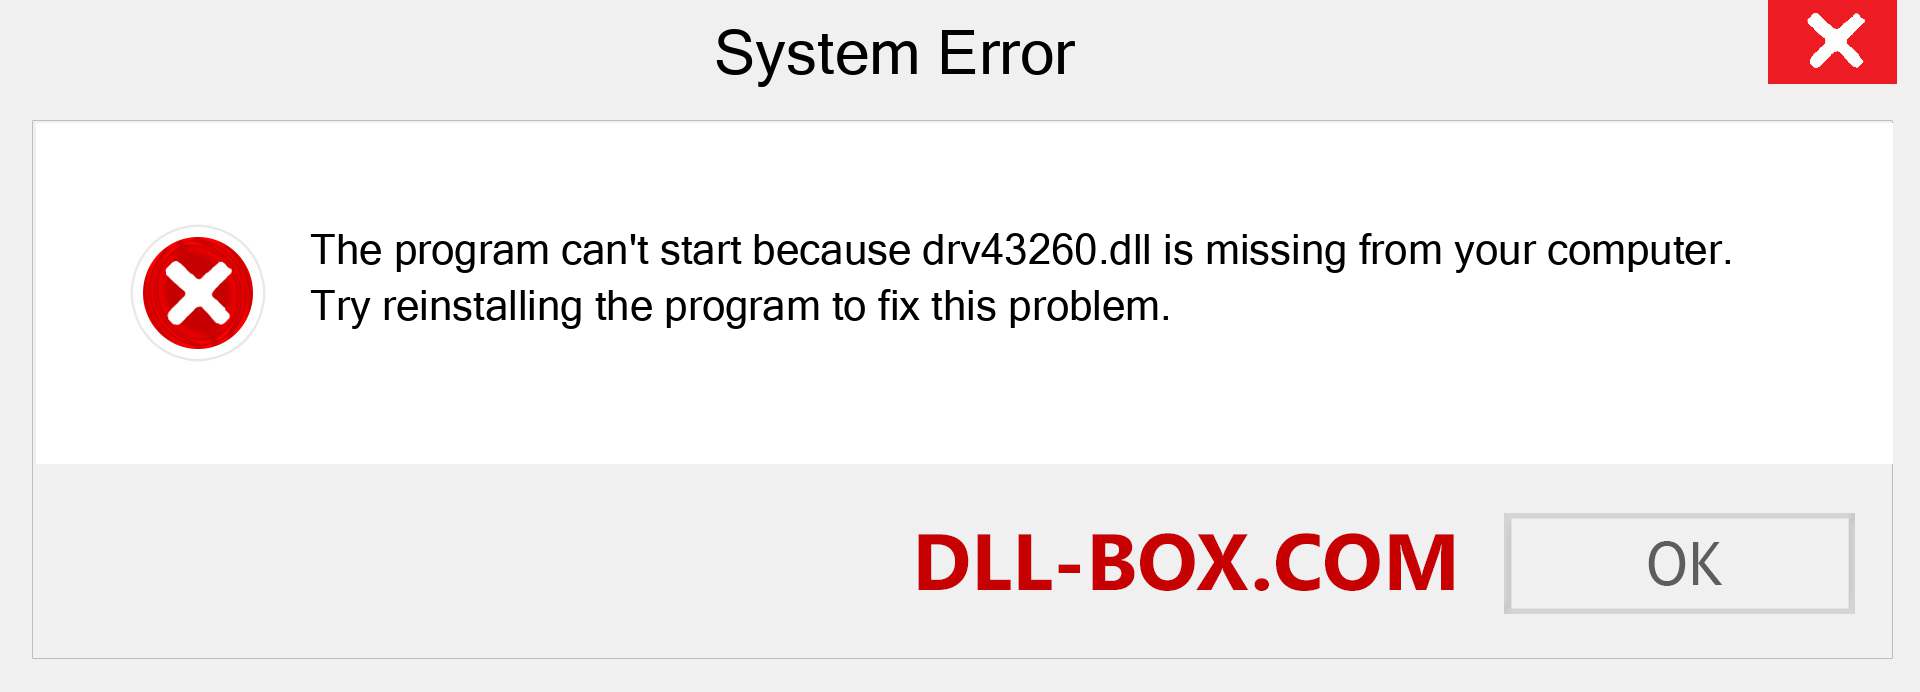  drv43260.dll file is missing?. Download for Windows 7, 8, 10 - Fix  drv43260 dll Missing Error on Windows, photos, images